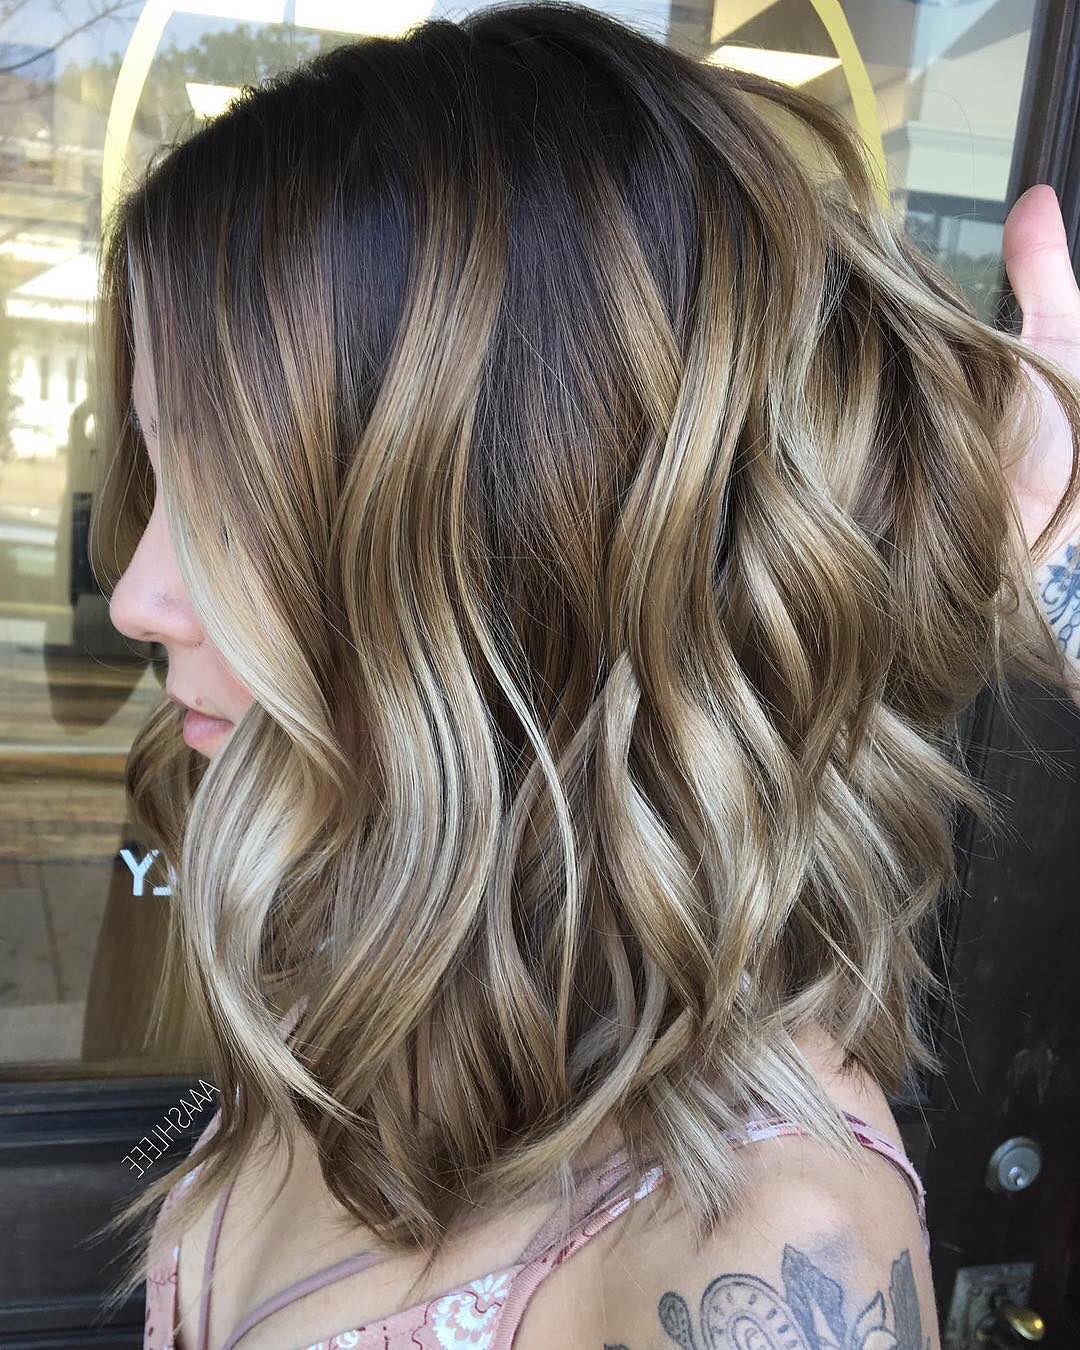 10 Balayage Ombre Hair Styles for Shoulder Length Hair ...